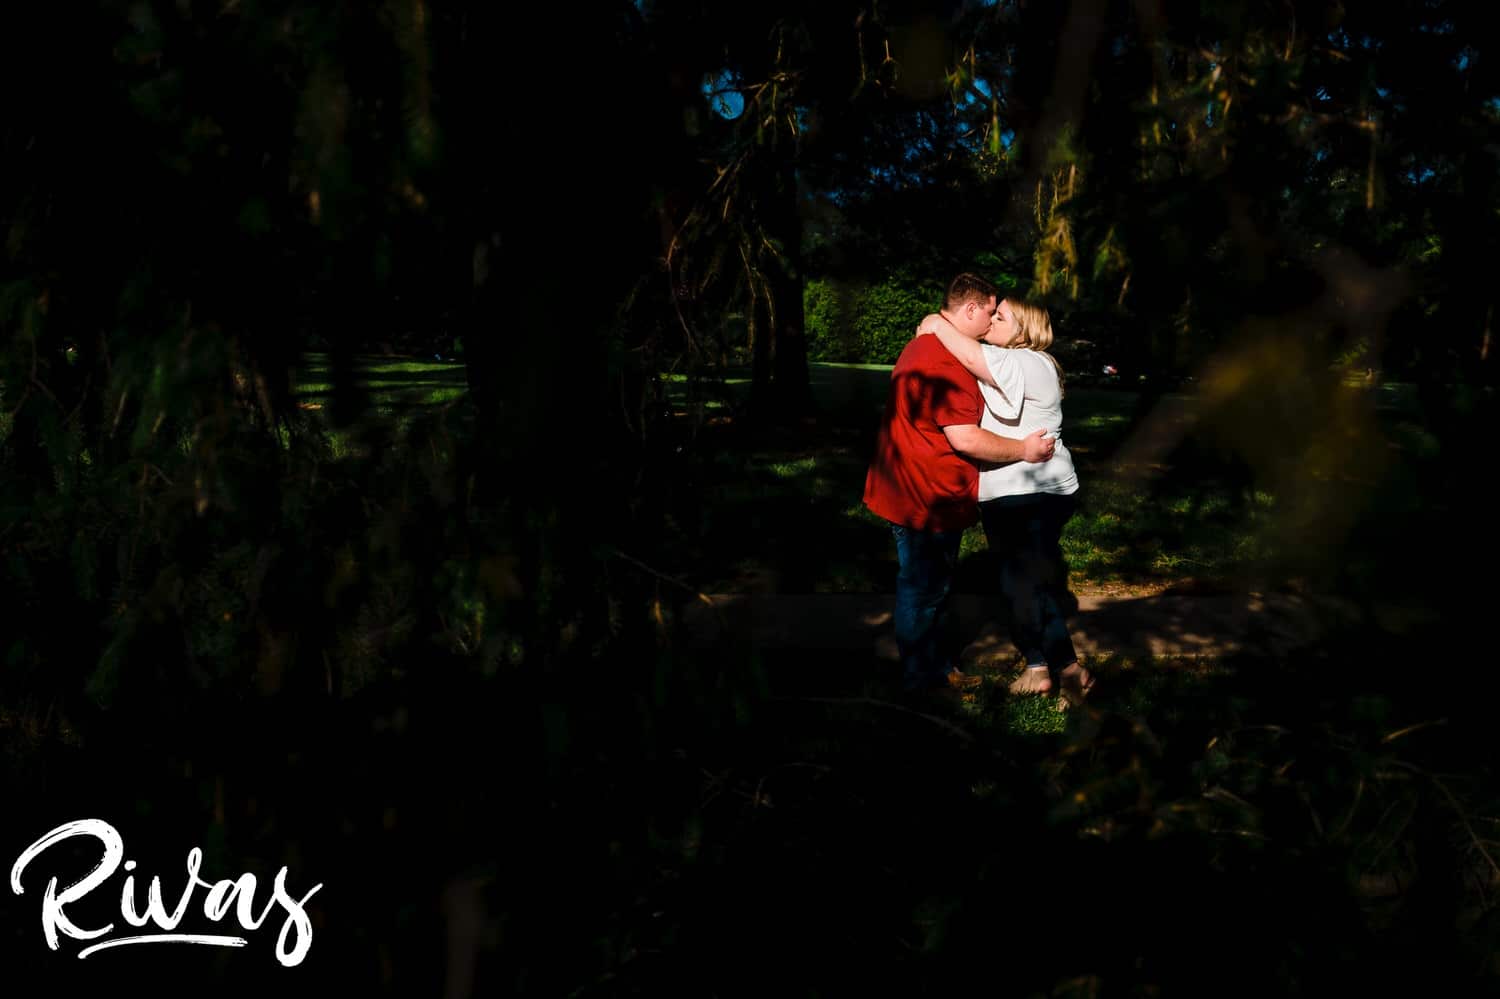 A vibrant portrait of an engaged couple sharing an embrace in a splash of sunlight amongst a canopy of dark trees during their engagement photography session at Loose Park in Kansas City. 